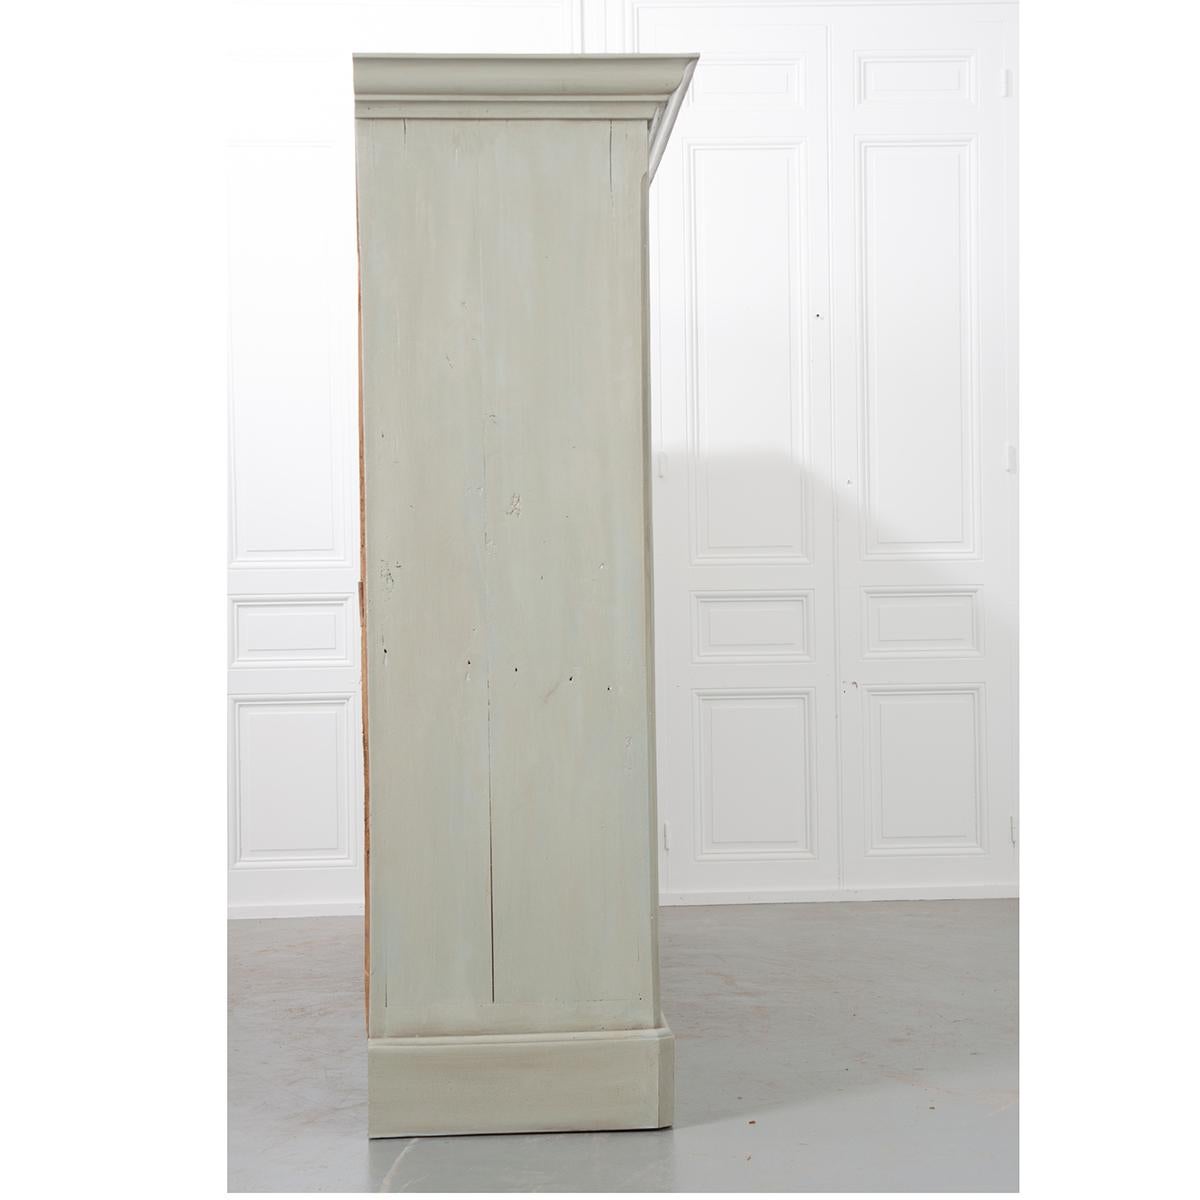 This freshly painted wardrobe cabinet is large and has ample storage. It is a green/grey color with a lighter coordinating paint used on the inset door panels and its interior is an earthen terracotta color. There are four doors, each set with an